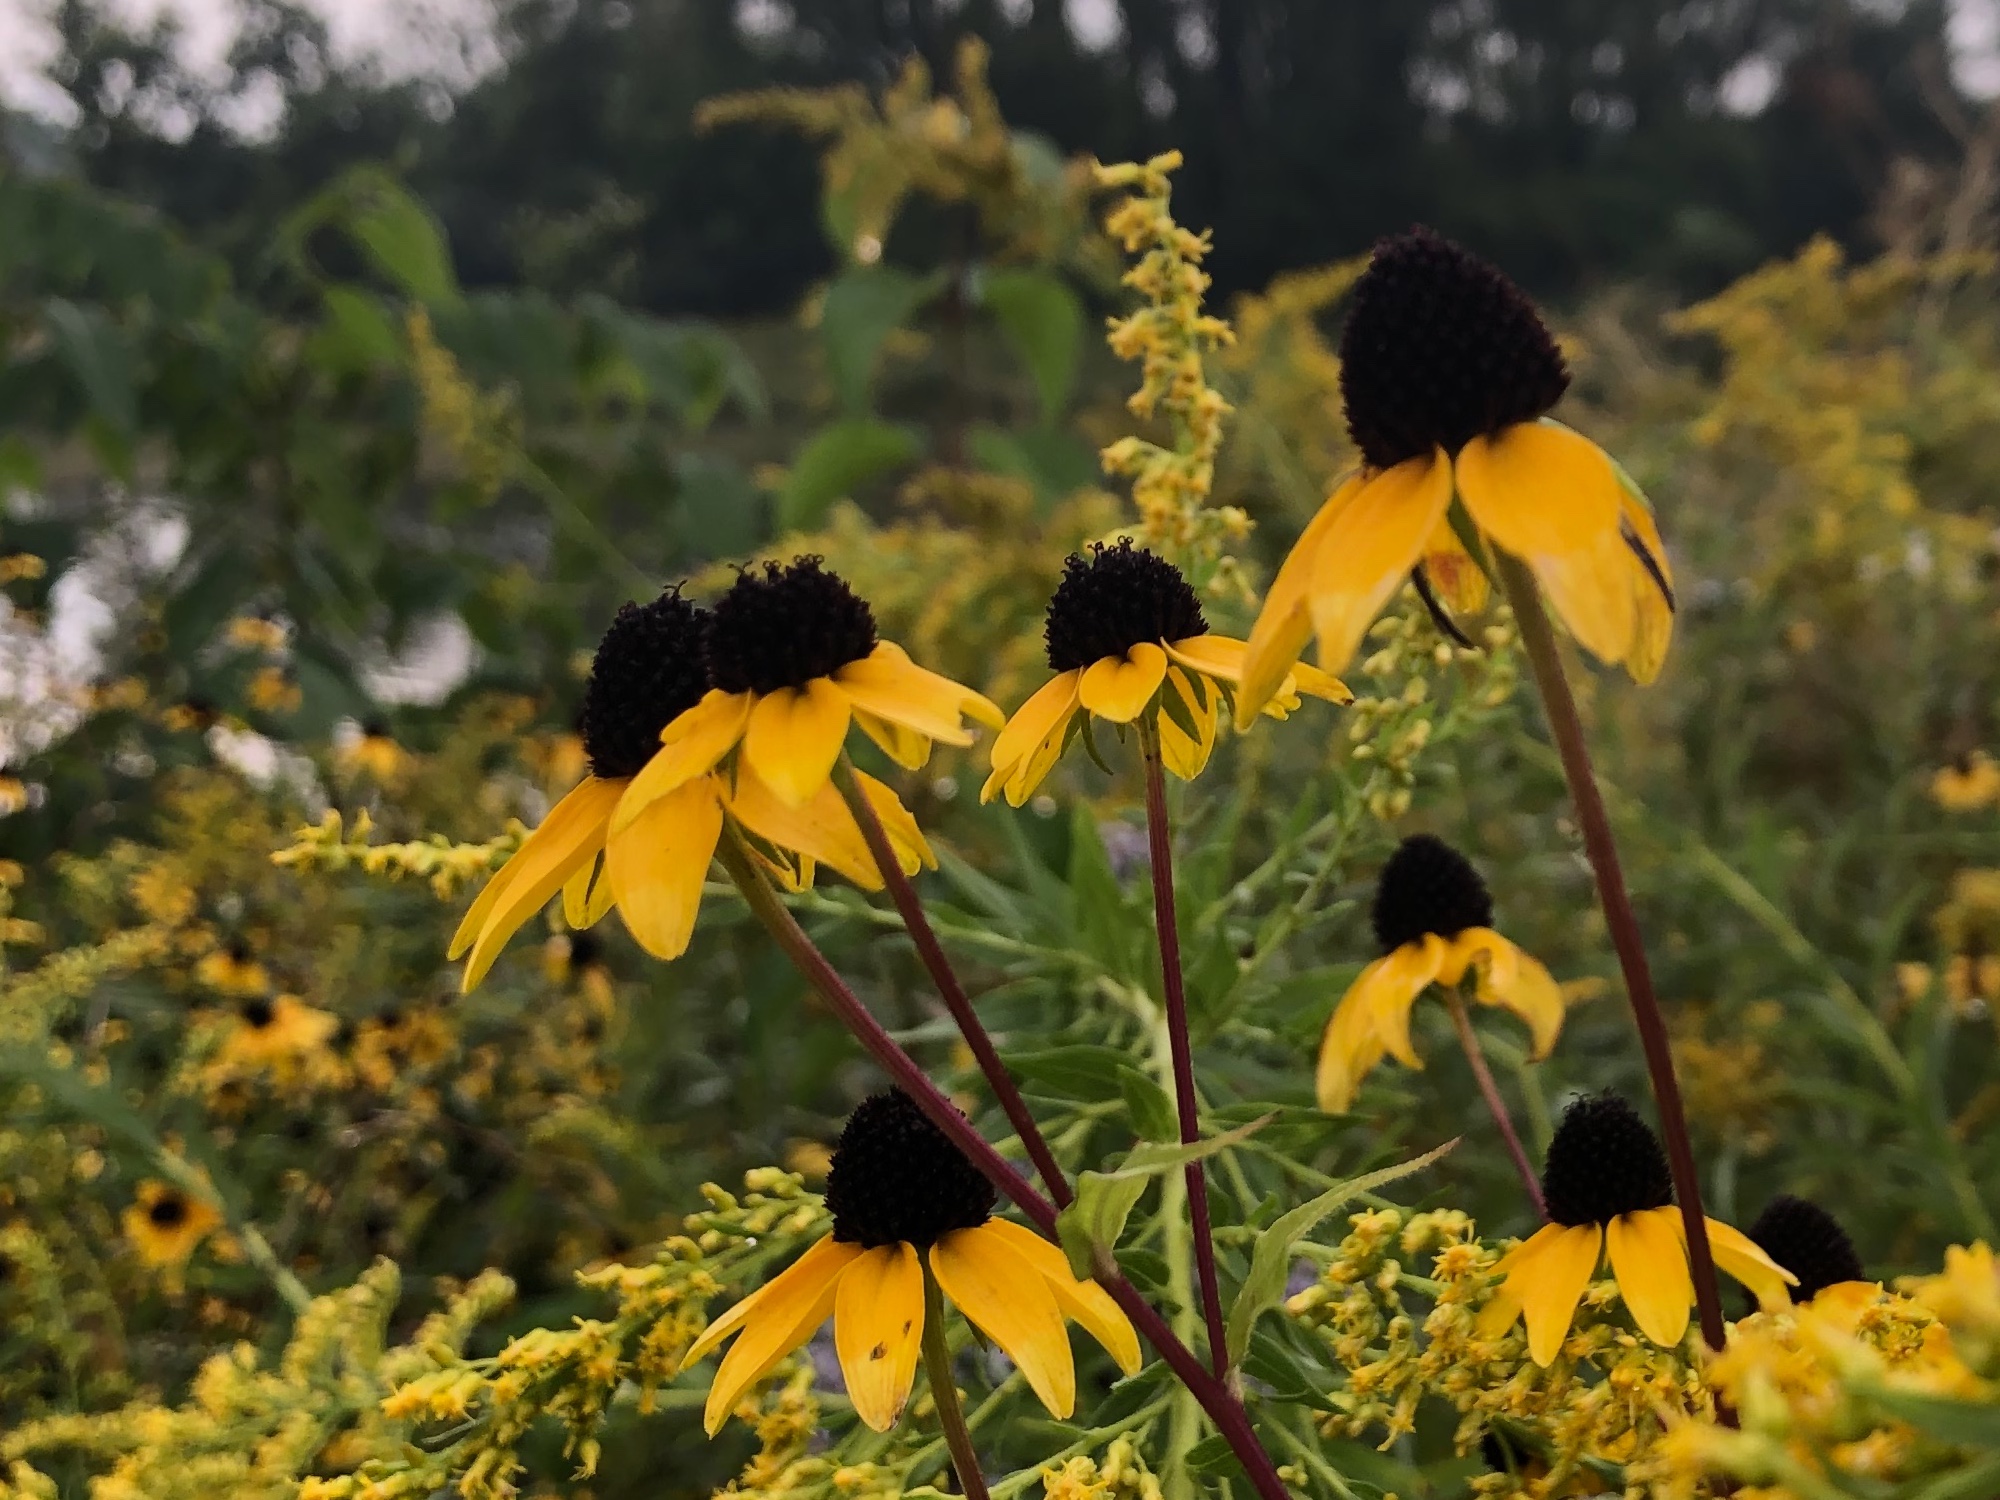 Brown-eyed Susan on bank of retaining pond in Madison, Wisconsin on July 29, 2020.